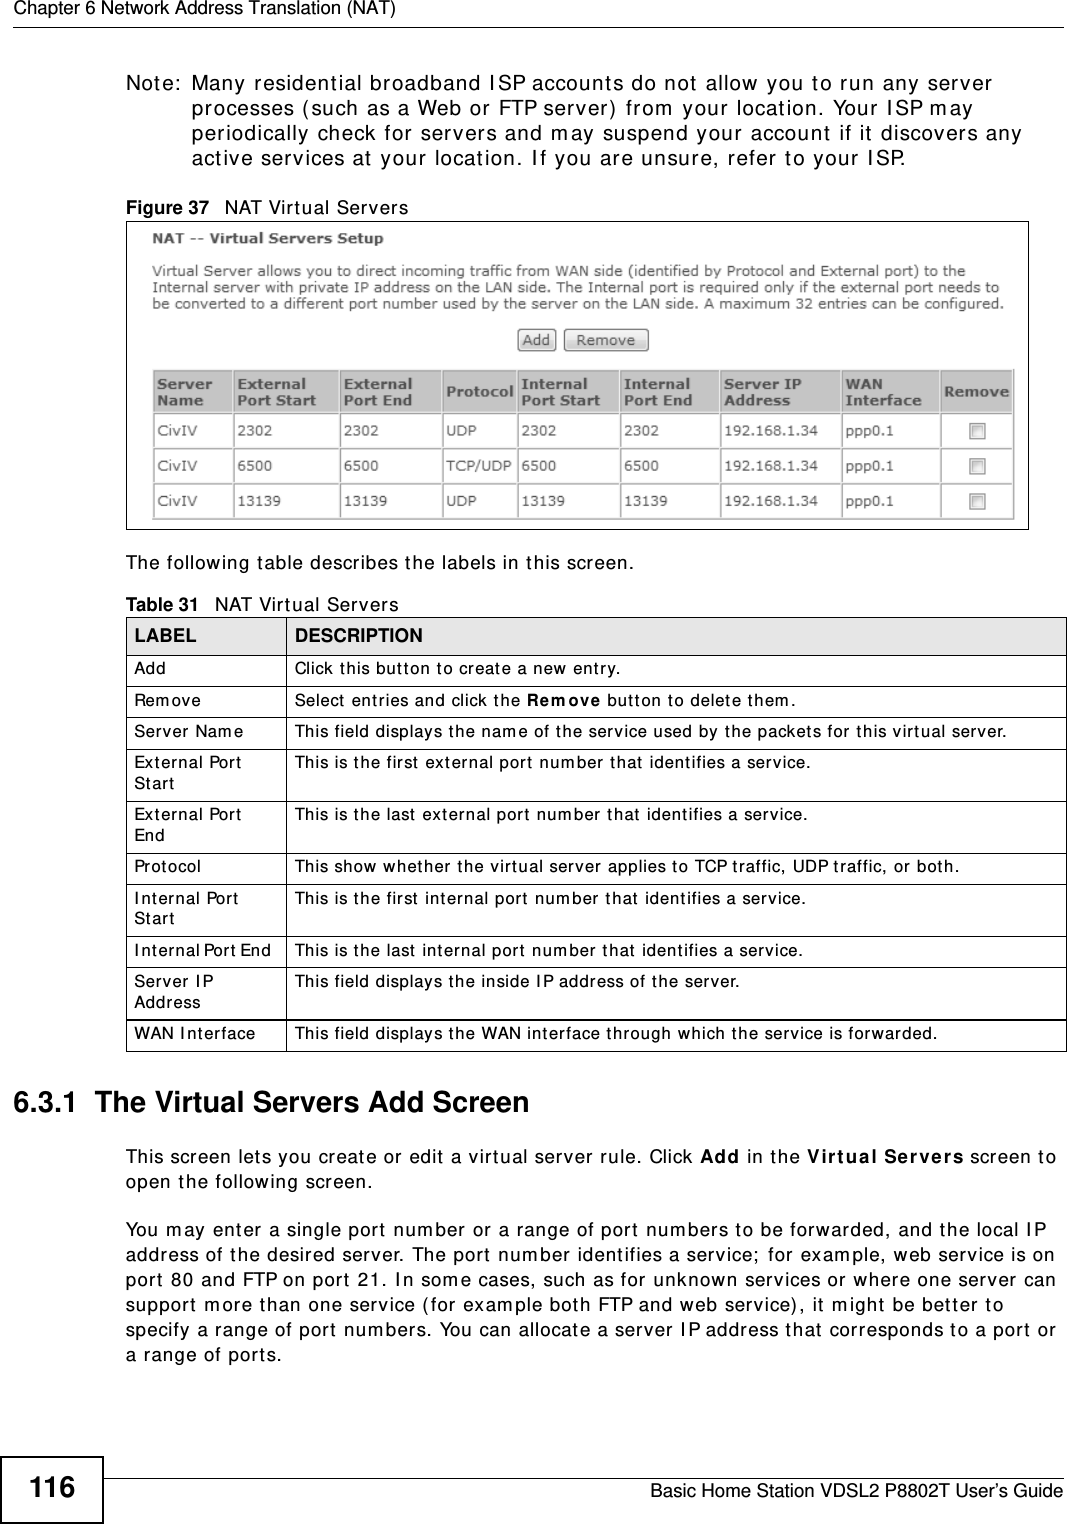 Chapter 6 Network Address Translation (NAT)Basic Home Station VDSL2 P8802T User’s Guide116Note:  Many residential broadband I SP account s do not allow you t o run any server processes ( such as a Web or FTP server)  from  your location. Your I SP m ay periodically check for servers and m ay suspend your account  if it discovers any act ive services at your location. I f you are unsure, refer to your I SP.Figure 37   NAT Virt ual Servers The following t able describes t he labels in t his screen. 6.3.1  The Virtual Servers Add Screen This screen let s you create or edit a virtual server  rule. Click Add in the V irt ual Server s screen t o open t he following screen.You m ay ent er a single port num ber  or a range of port num bers t o be forwarded, and t he local I P address of t he desired server. The por t number  identifies a service;  for  exam ple, web service is on port  80 and FTP on port  21. I n som e cases, such as for unknown services or  where one server can support m ore t han one service ( for exam ple bot h FTP and web service), it m ight  be bet t er to specify a range of port num bers. You can allocat e a server I P address t hat  corresponds t o a port  or a range of ports.Table 31   NAT Virtual ServersLABEL DESCRIPTIONAdd Click this but ton t o cr eate a new entr y.Rem ove Select  ent ries and click the Re m ove  butt on to delet e them .Ser ver Nam e This field displays the nam e of the ser vice used by the packet s for this virt ual server. Ext ernal Por t St art  This is t he first  ext ernal port  num ber t hat identifies a service.Ext ernal Por t End This is t he last ext ernal port  num ber t hat ident ifies a serv ice.Protocol This show w het her t he virtual server applies t o TCP traffic, UDP t raffic, or both.I nter nal Port St artThis is t he first  inter nal port number that ident ifies a service.I nt er nal Port  En d    This is t he last int ernal port  num ber that identifies a ser vice.Ser ver I P AddressThis field displays the inside I P addr ess of t he server.WAN I nterface This field displays the WAN int erface through which the serv ice is forwarded.